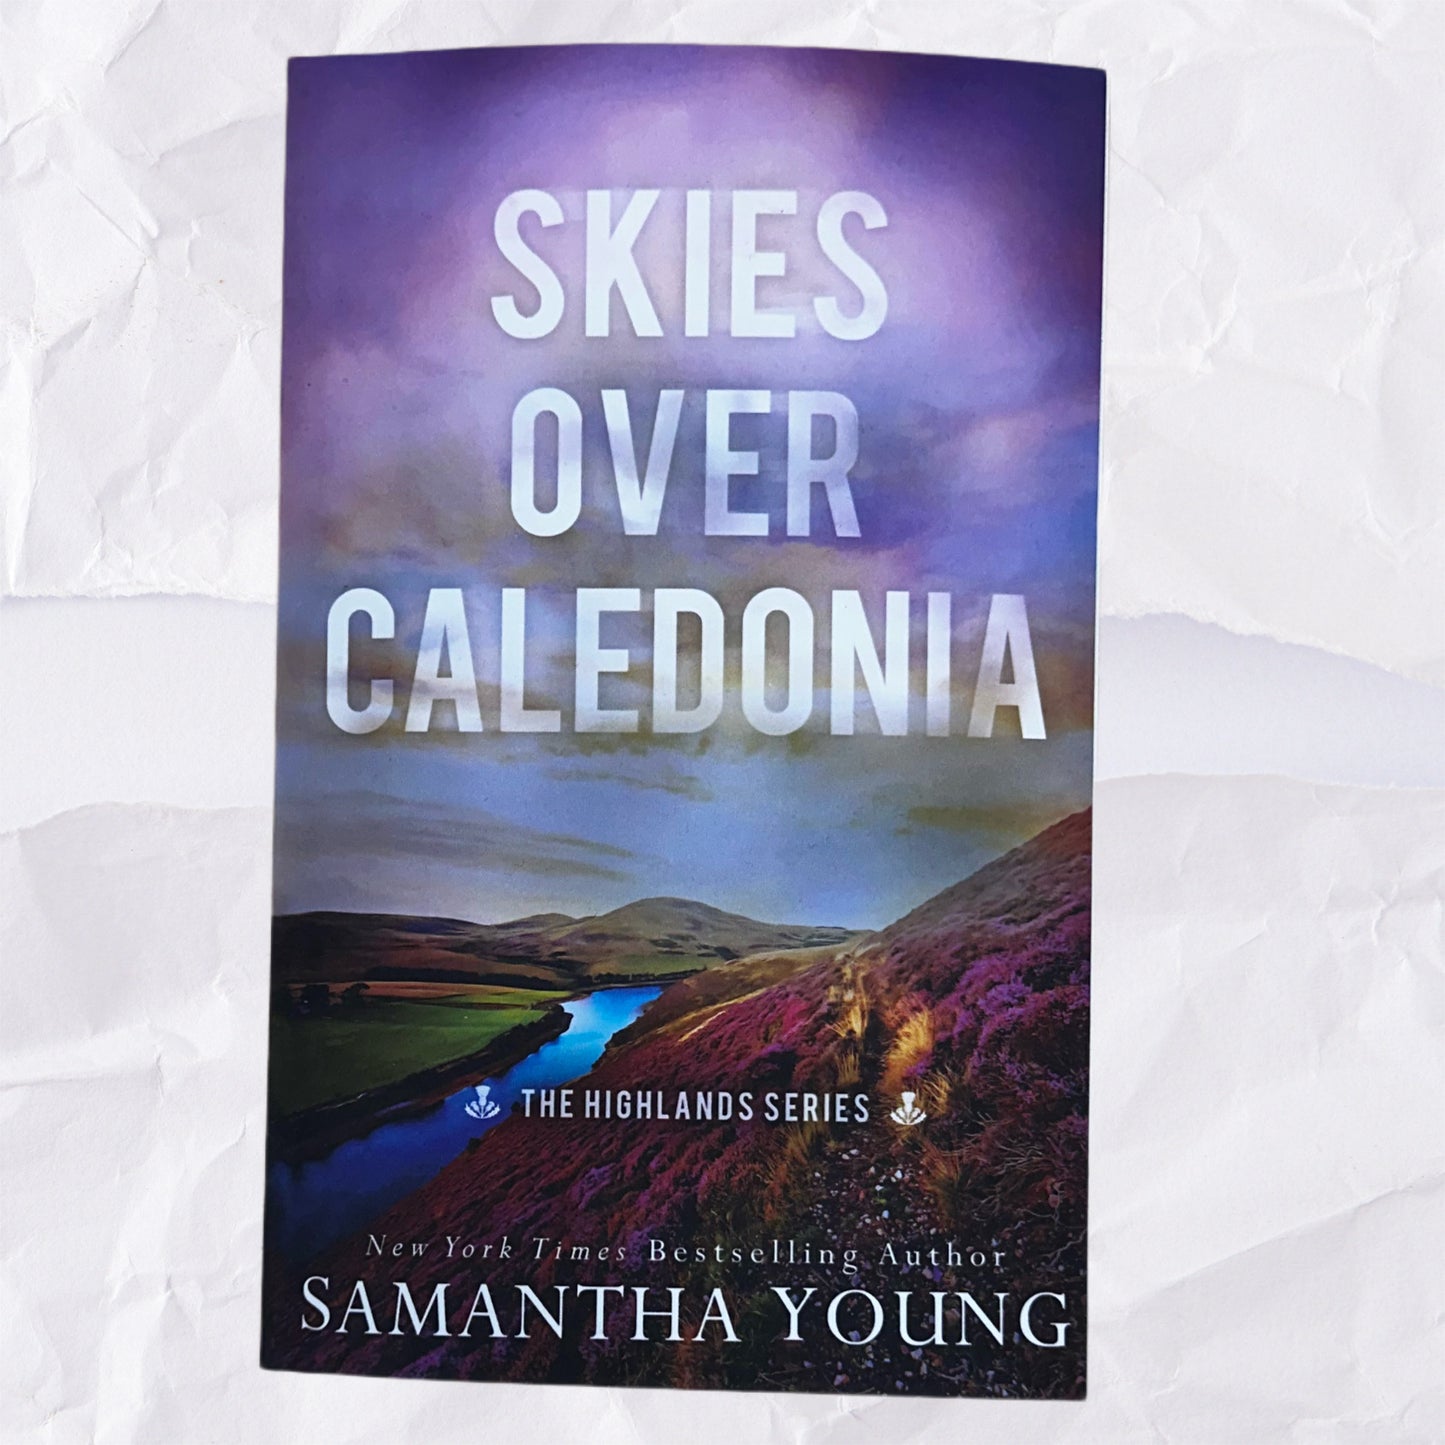 Skies Over Caledonia (The Highlands #4) by Samantha Young